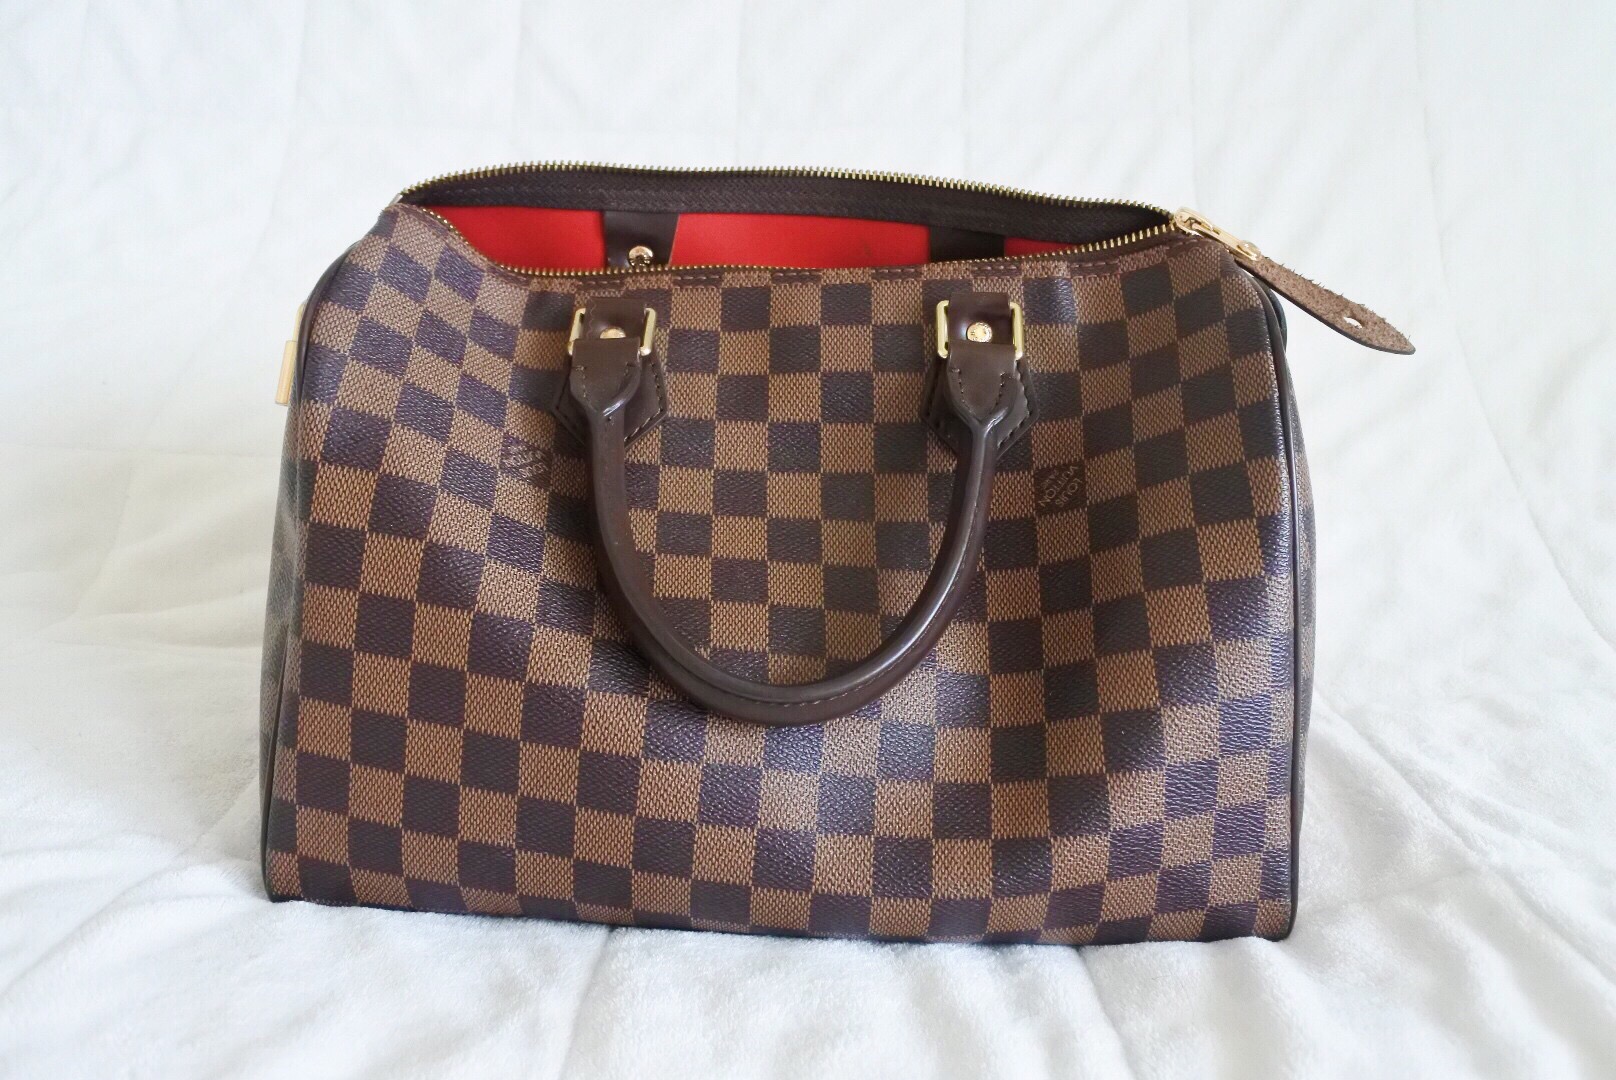 LOUIS VUITTON SPEEDY 30 DAMIER EBENE REVIEW + WHAT'S IN MY BAG